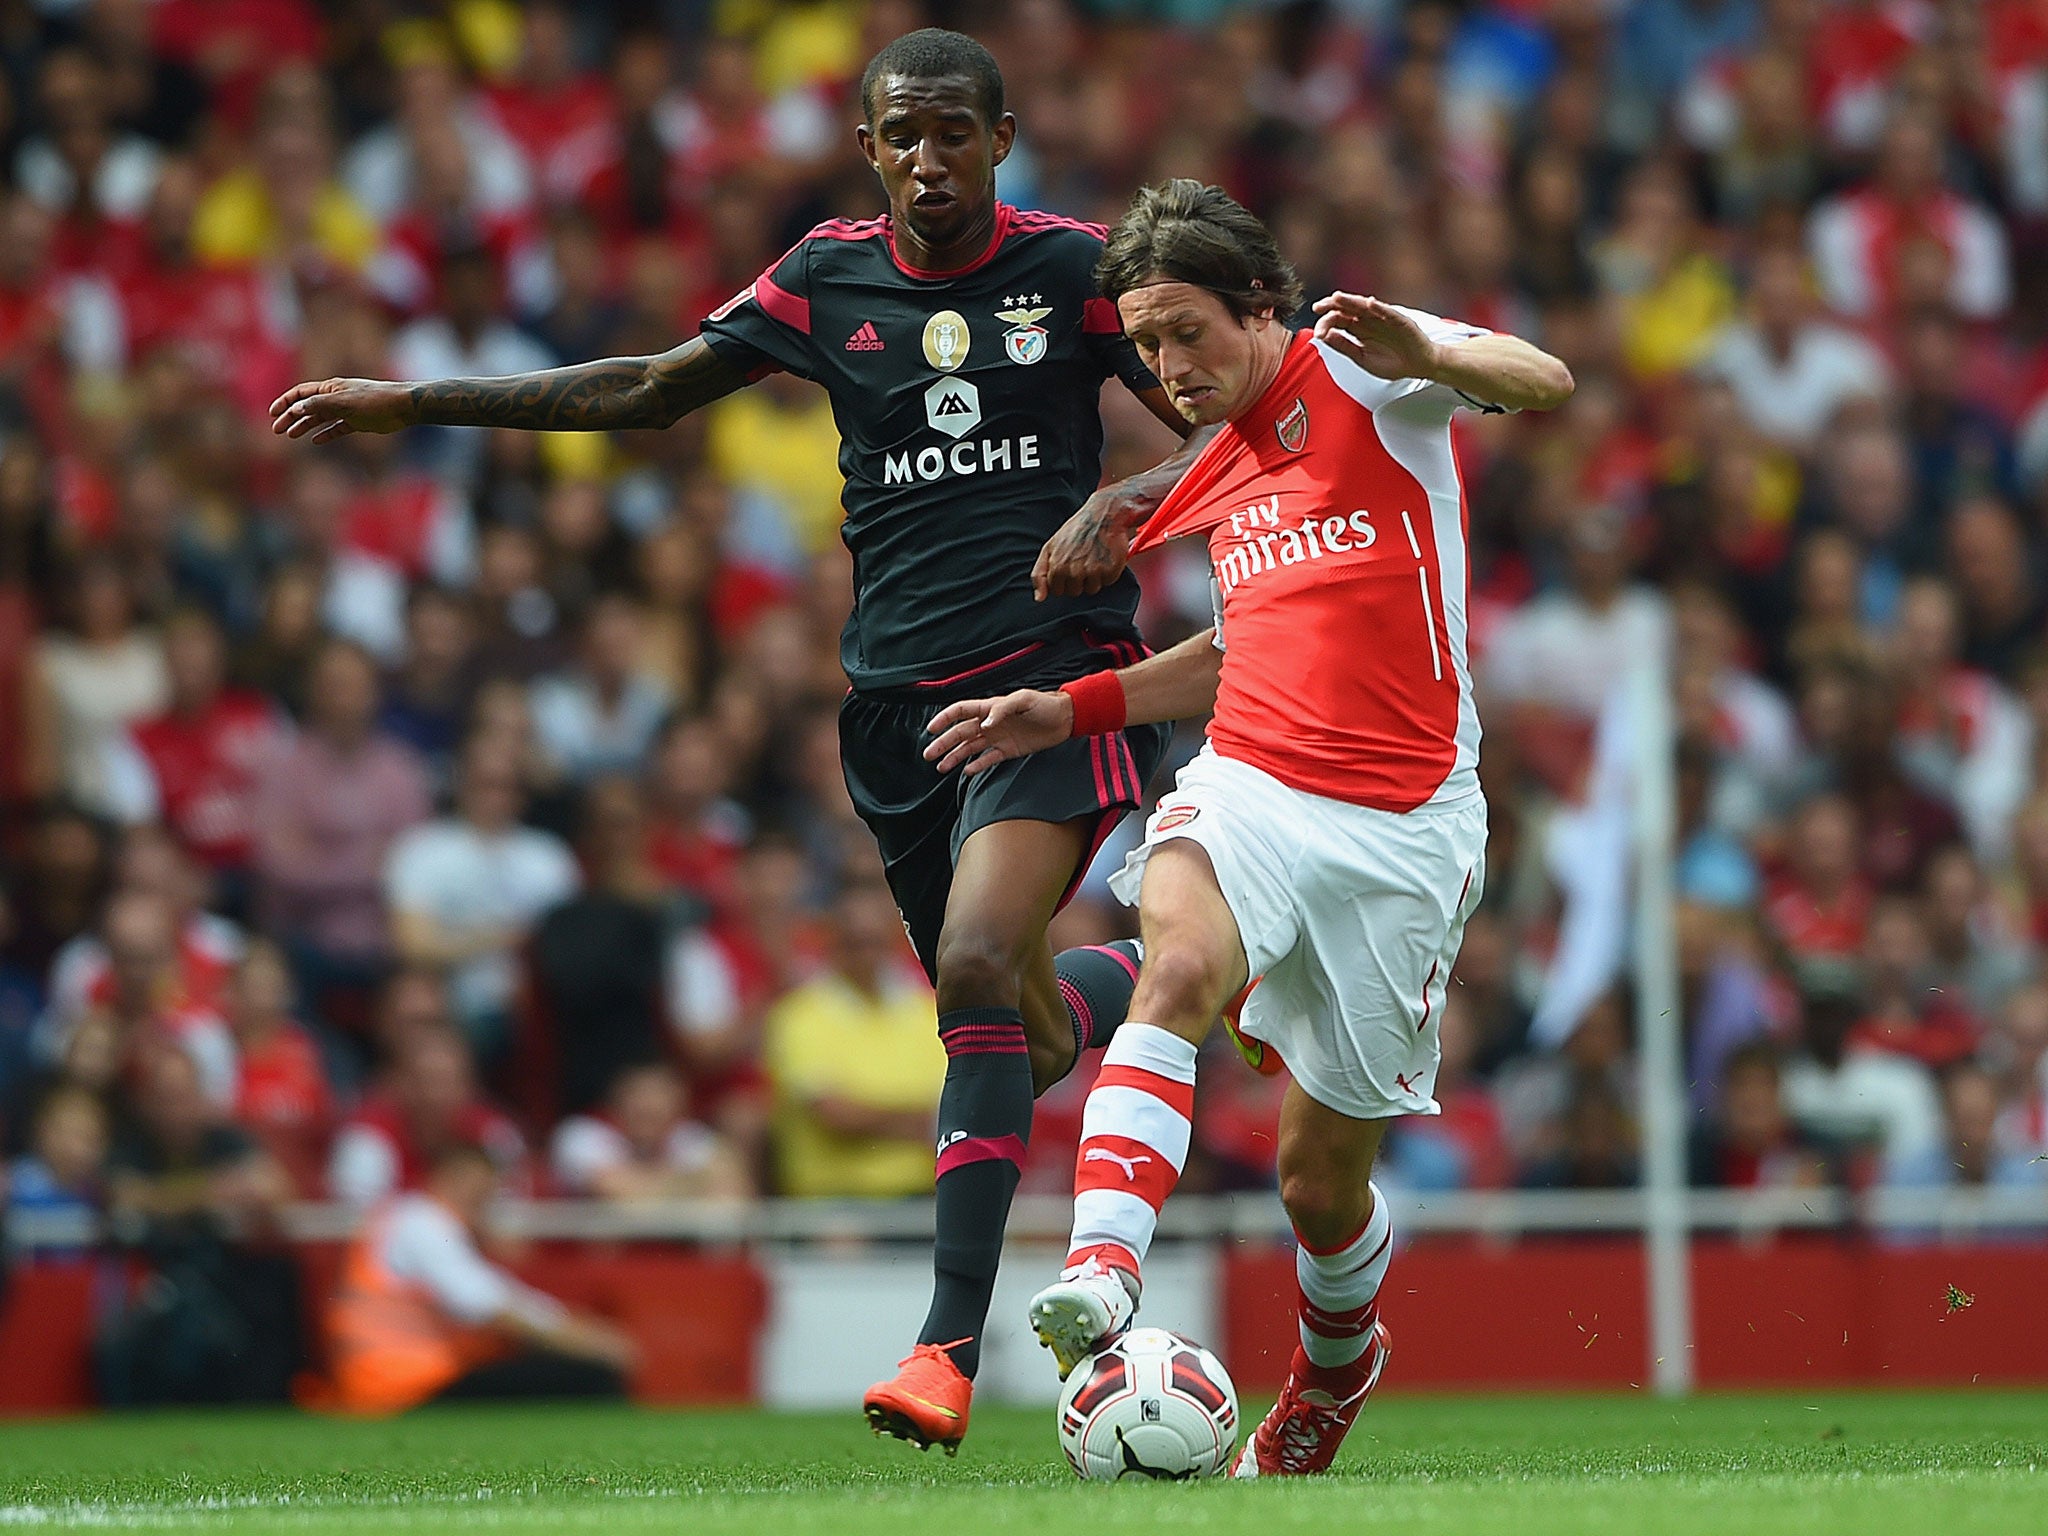 Tomas Rosicky is now the third longest-serving player in the current Arsenal squad